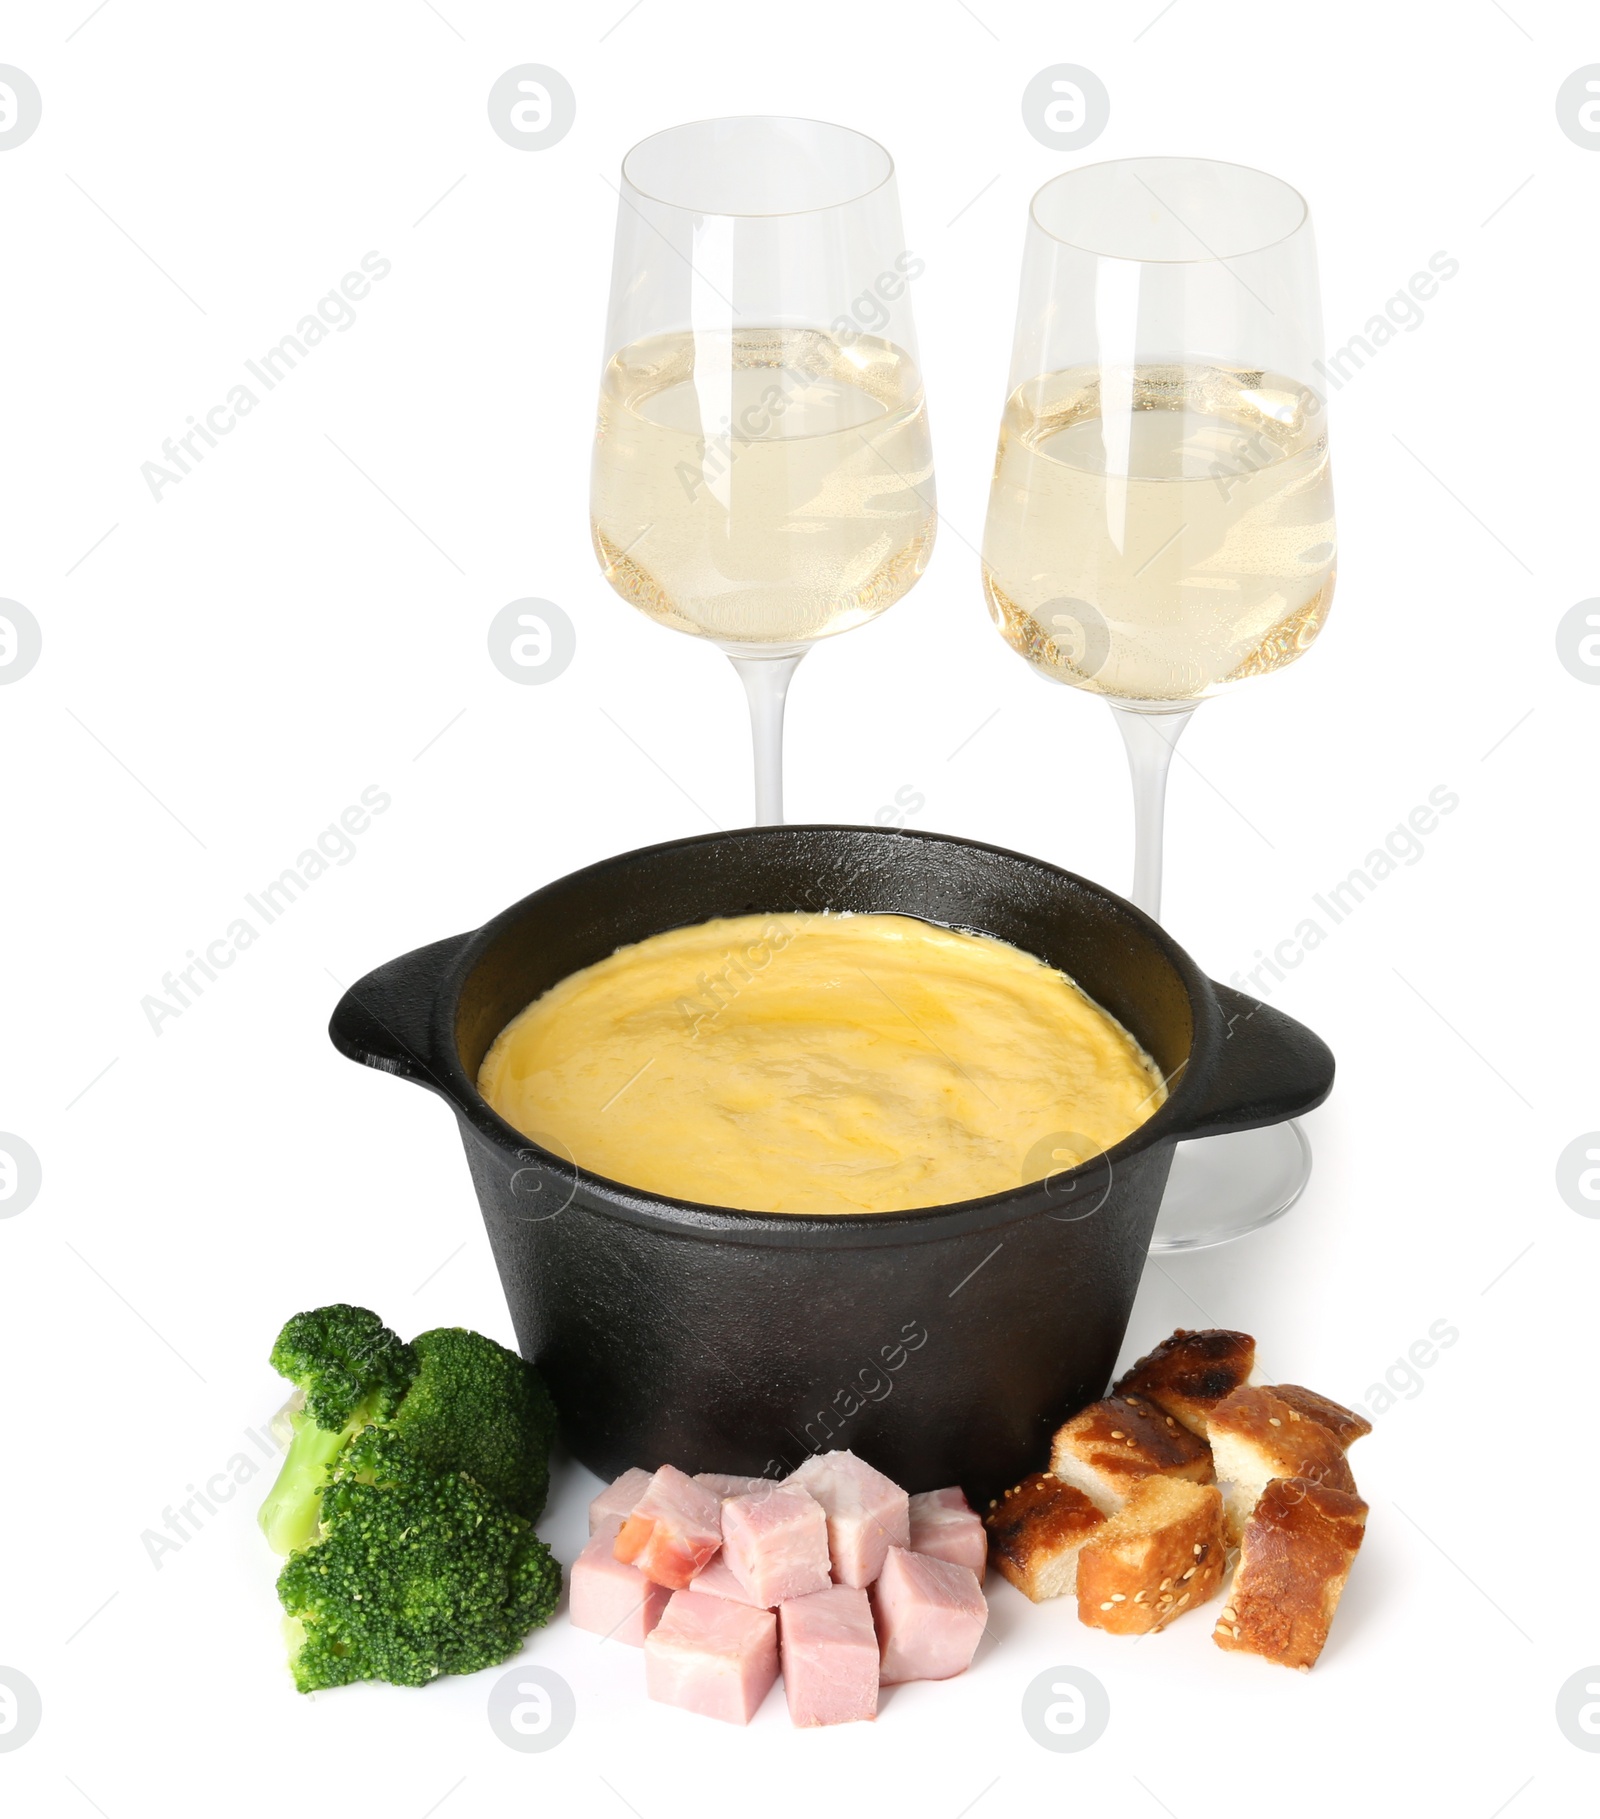 Photo of Fondue with tasty melted cheese, glasses of wine and different products isolated on white